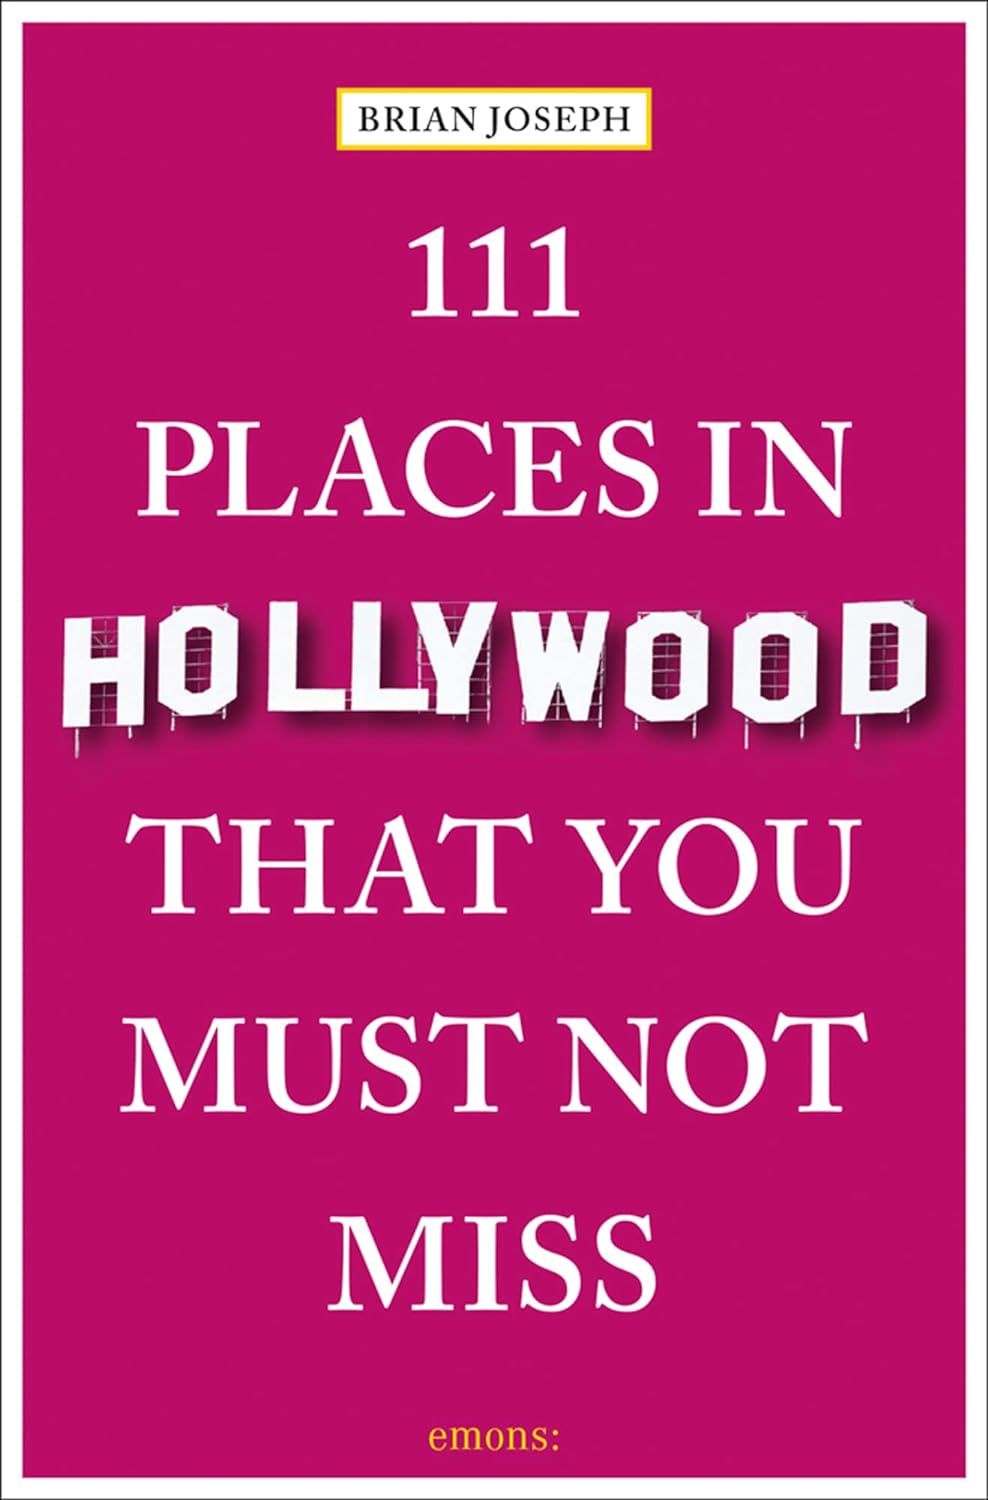 Pacific Coast Highway Travel reviews 111 Places in Hollywood That You Must Not Miss, a guide that includes iconic attractions and hidden secrets too.